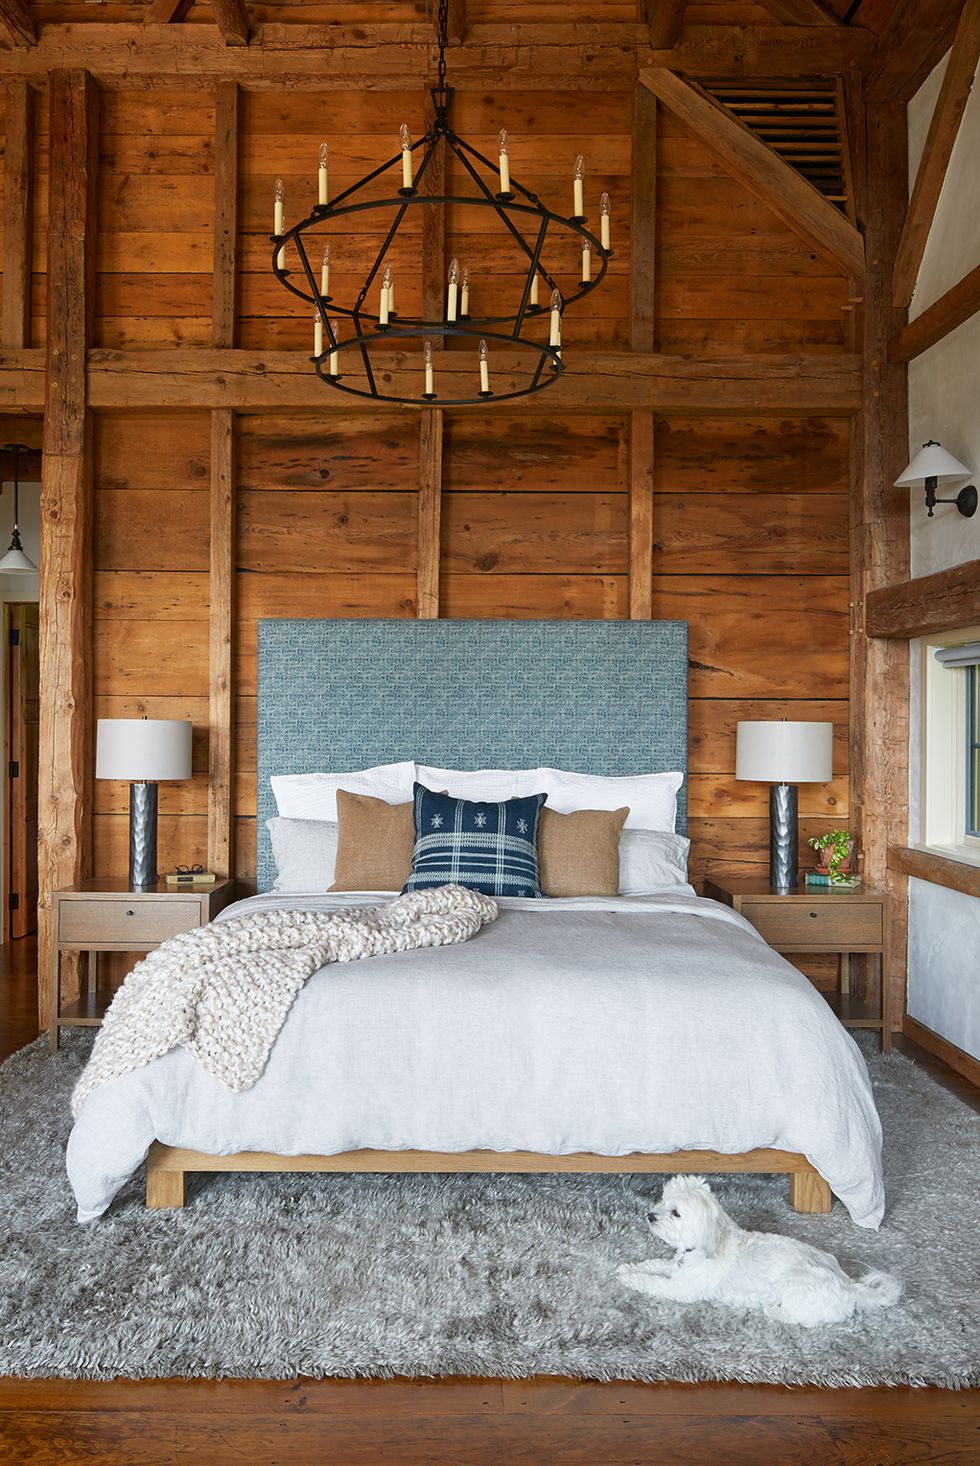 Bed with blue headboard and wood paneled walls